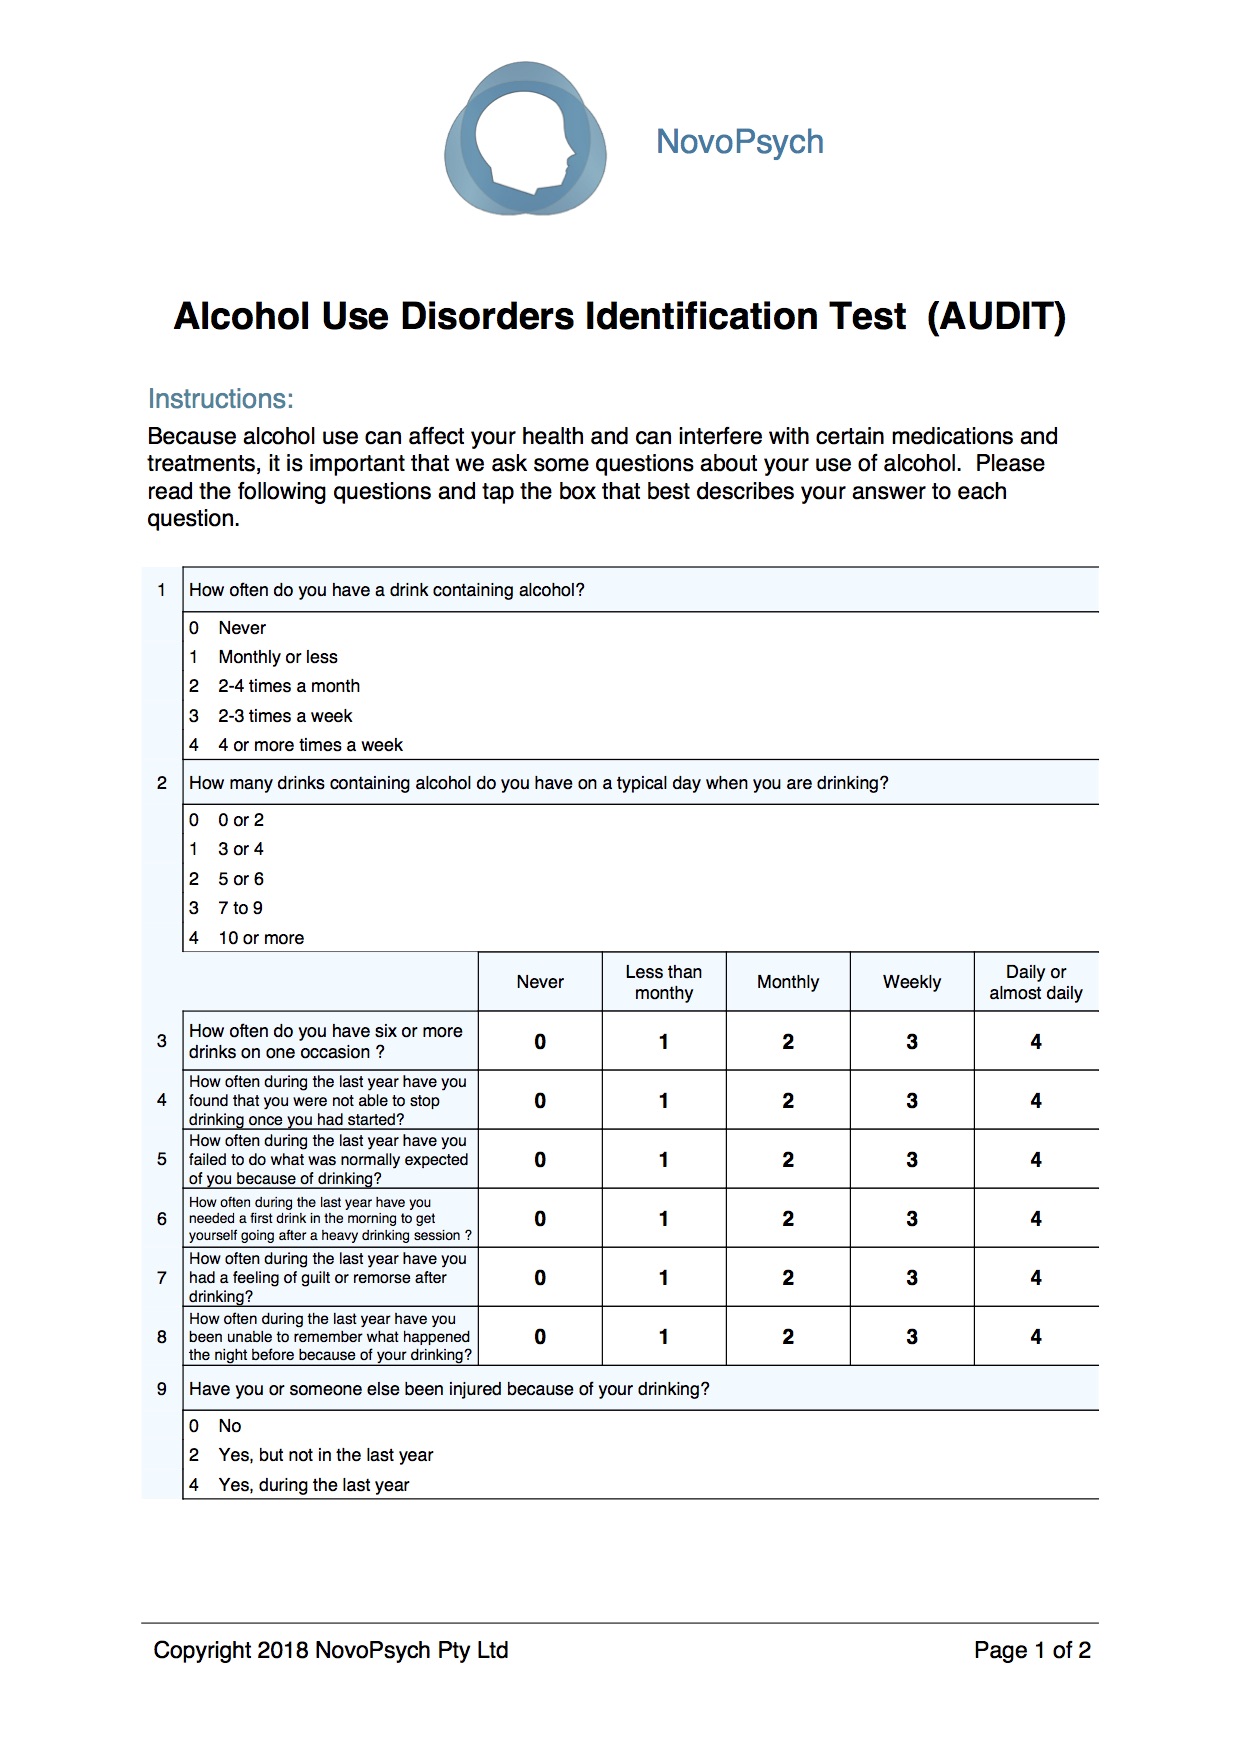 Papel Del Test Audit Alcohol Use Disorders Identification Test Para